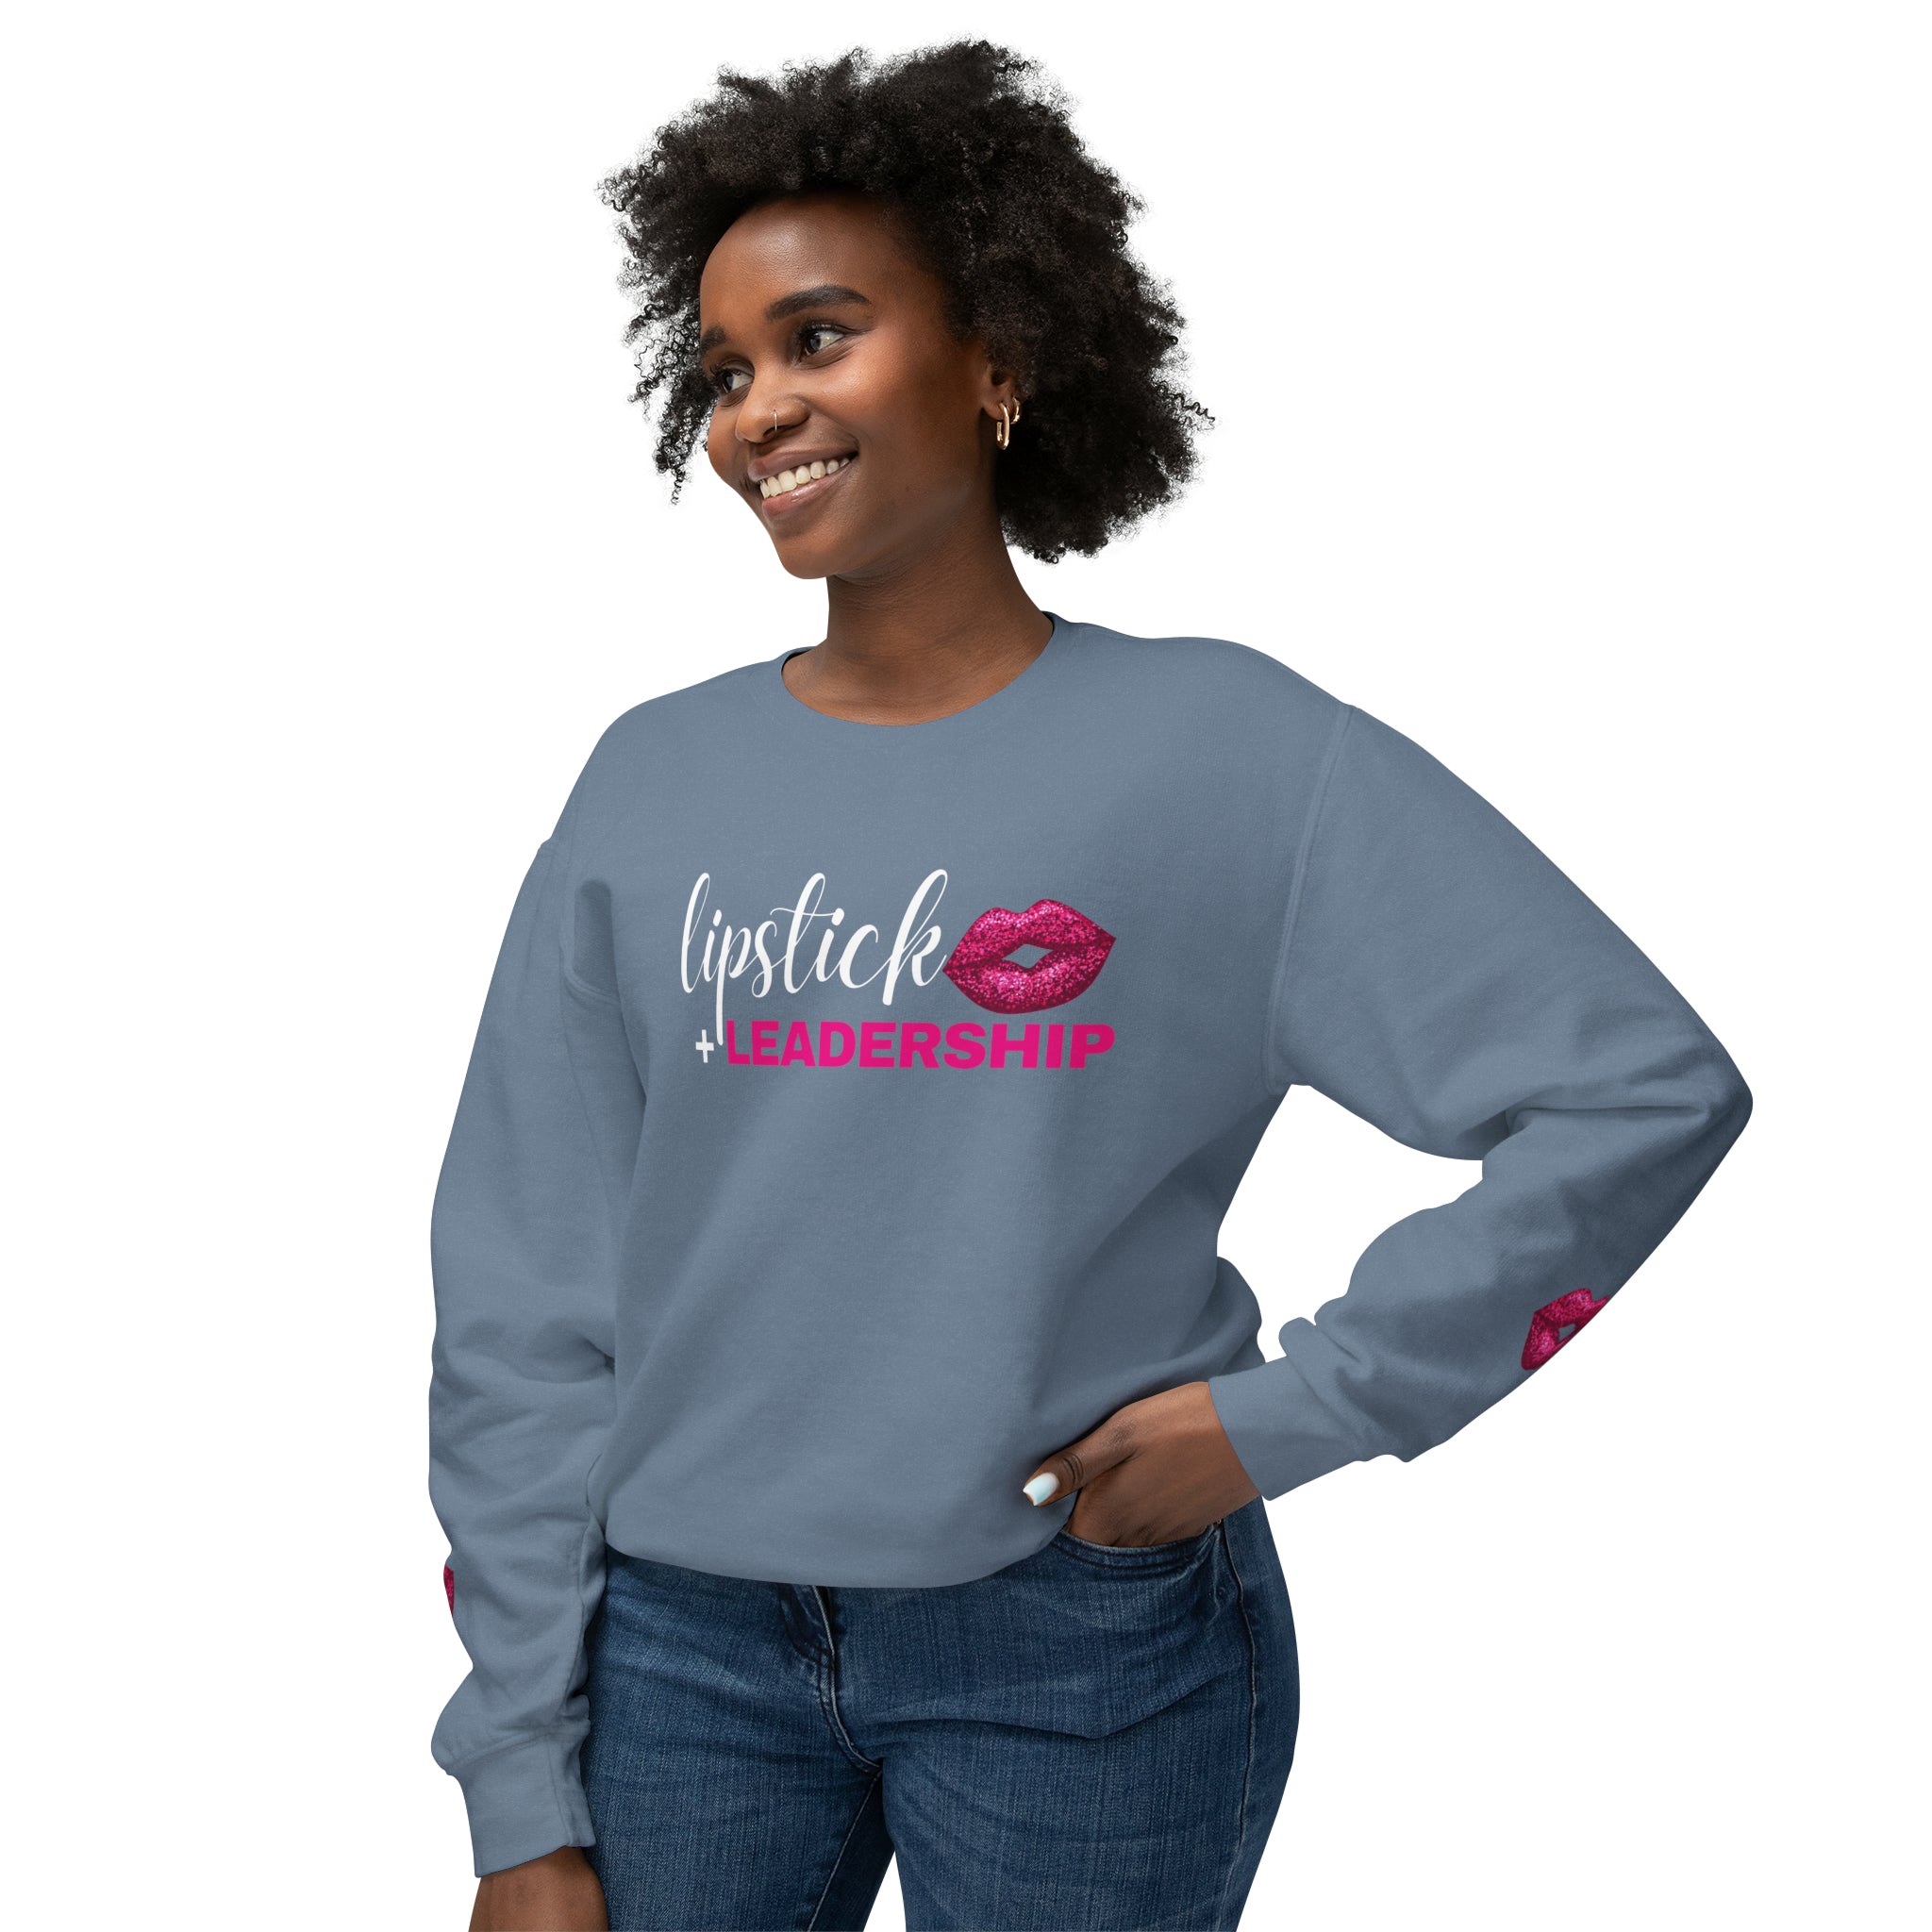 Lipstick + Leadership (Pink Sparkle Lips) Relaxed Fit Lightweight Crewneck Sweatshirt, Makeup Sweatshirt, Beauty Business Sweatshirt Sweatshirt  The Middle Aged Groove